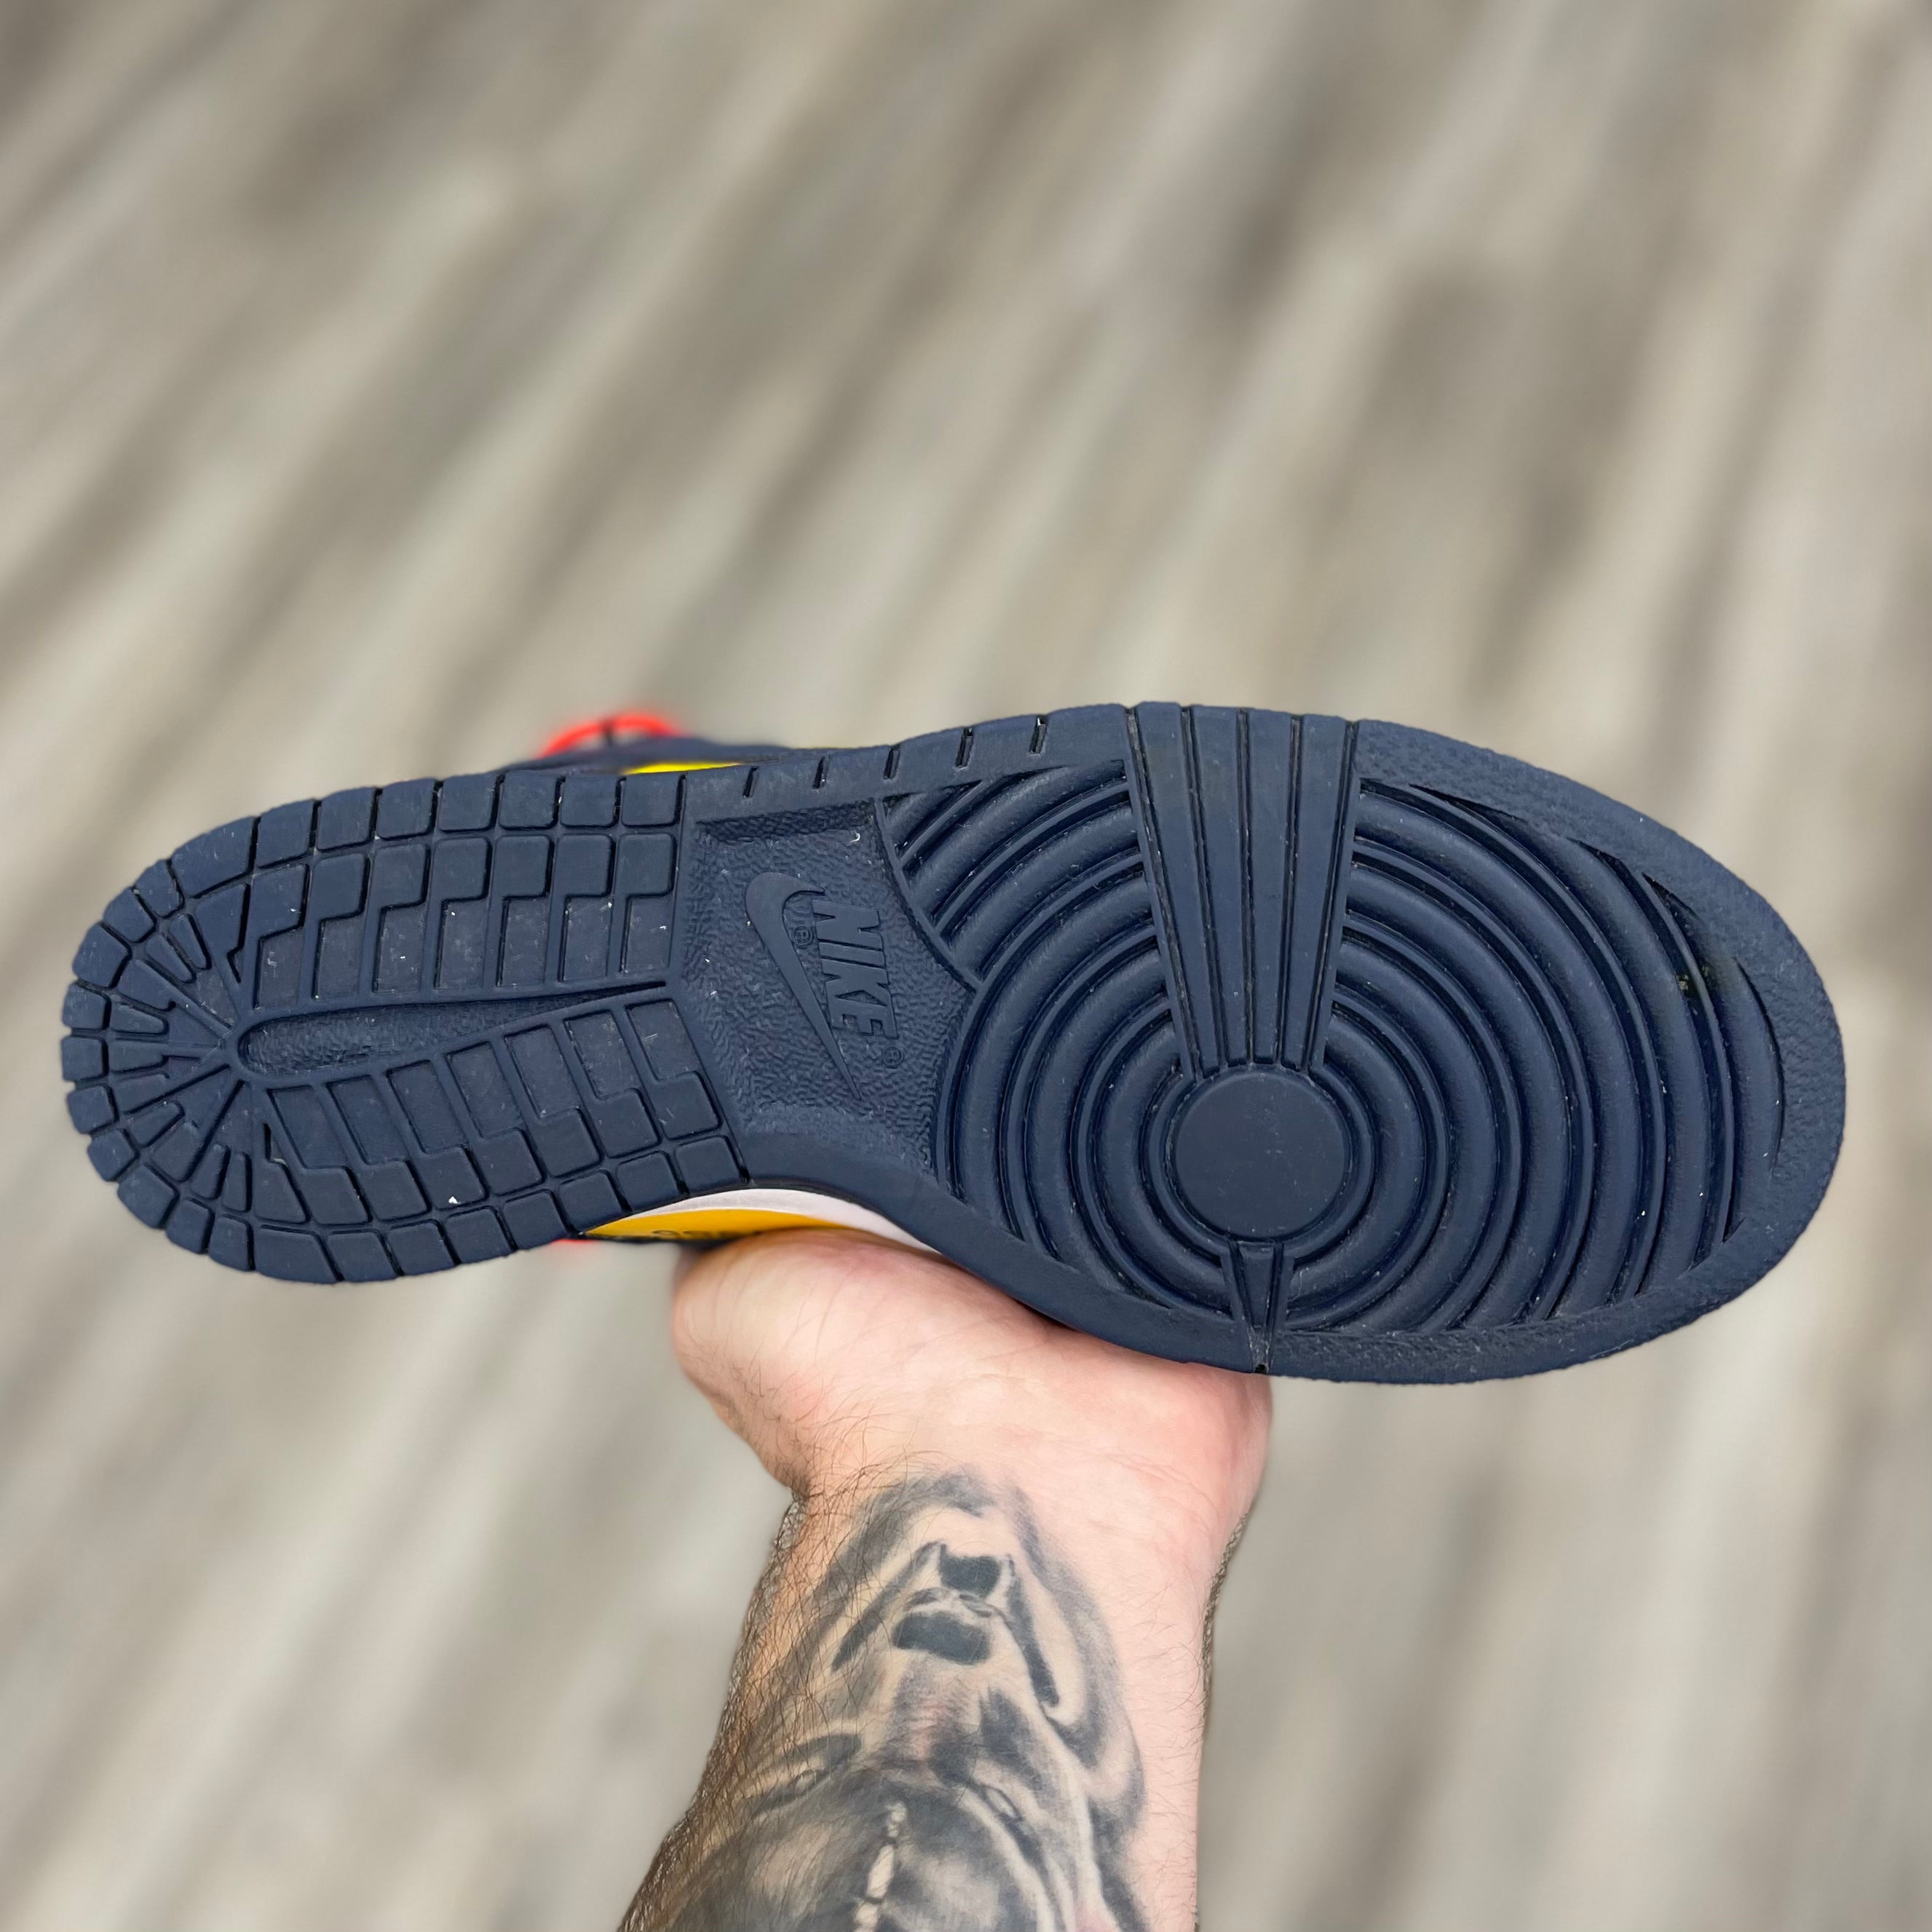 Nike Dunk Low “Off-White University Gold Midnight Navy”